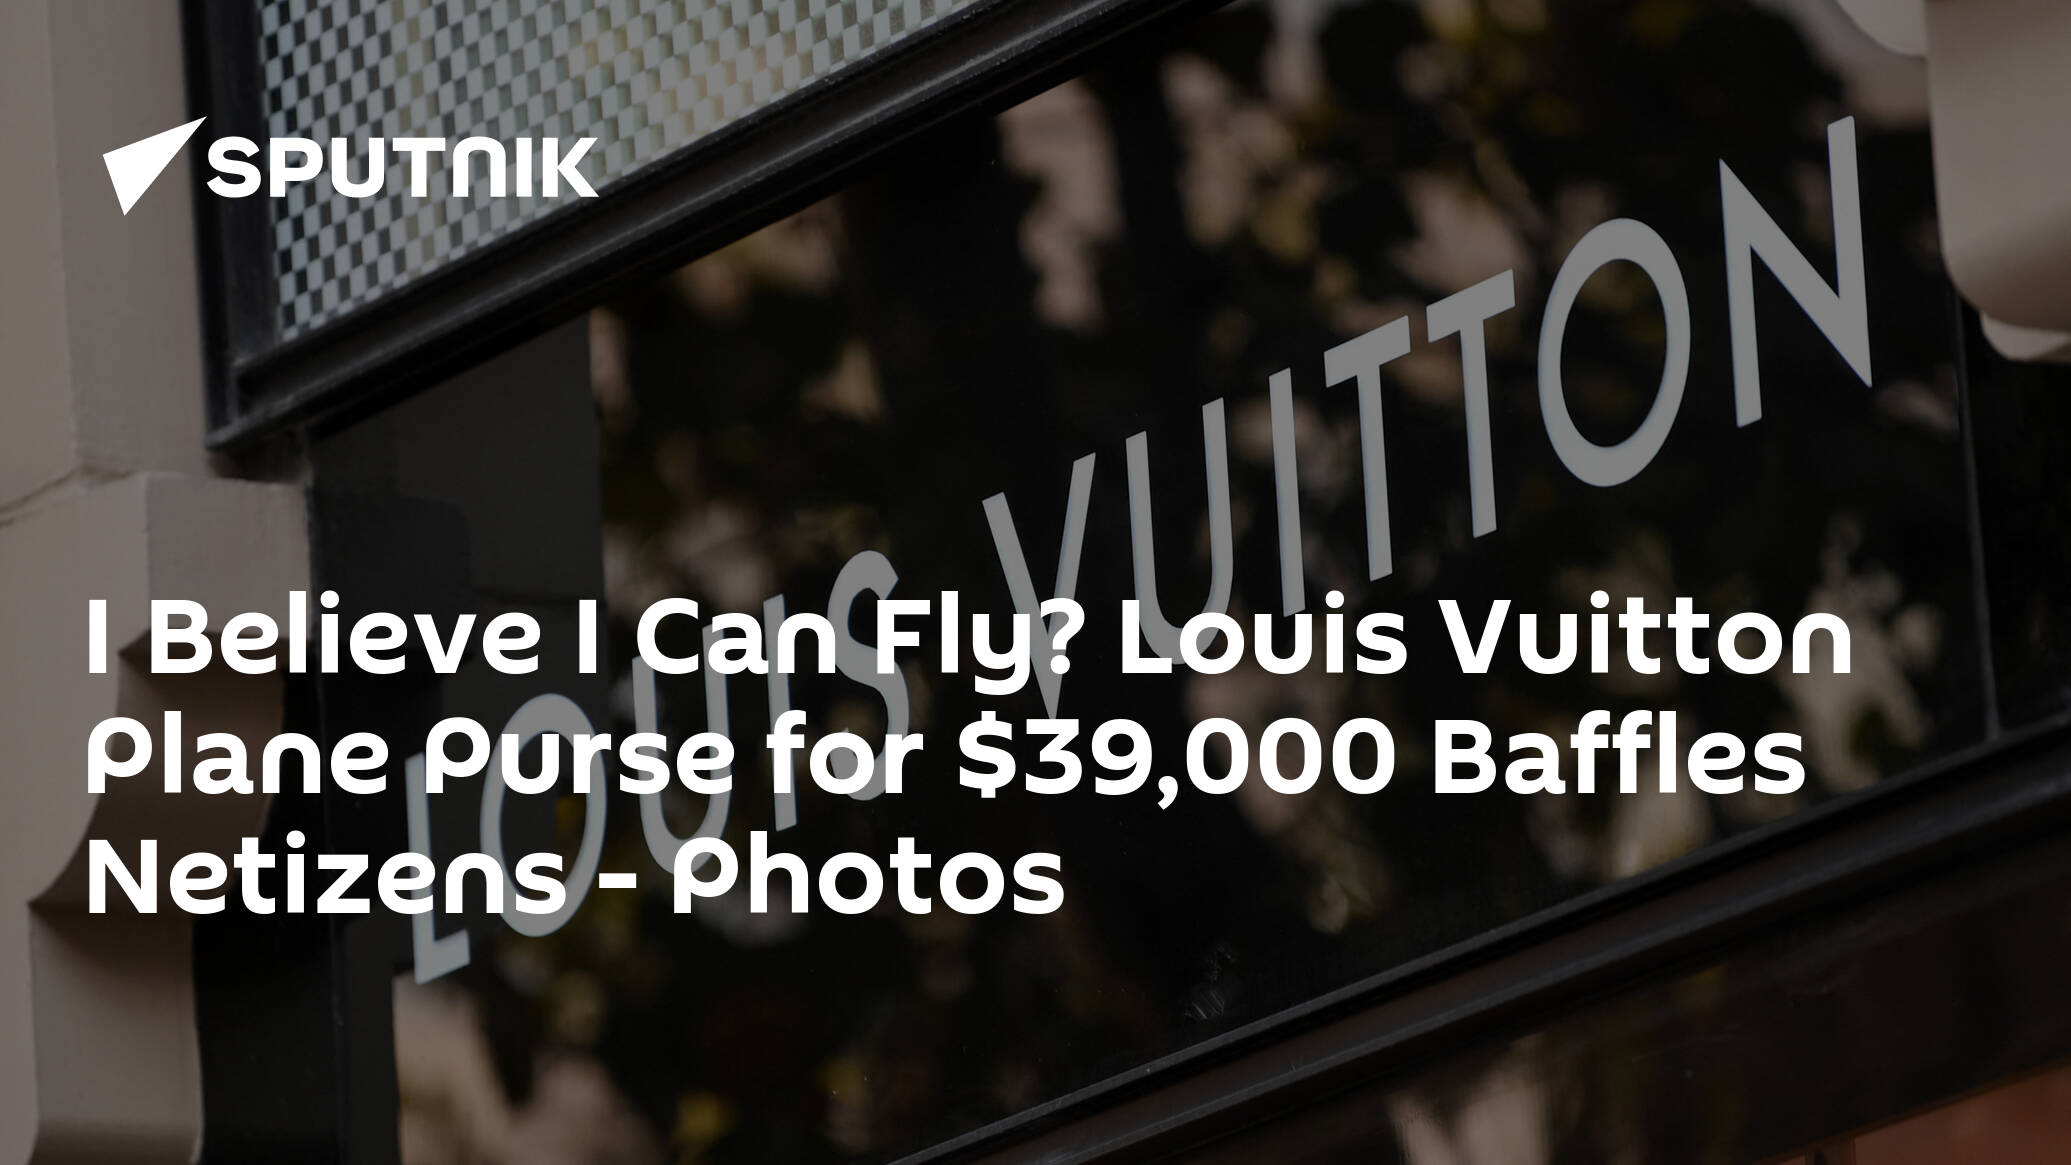 I am just baffled by this $39,000 Louis Vuitton handbag which is